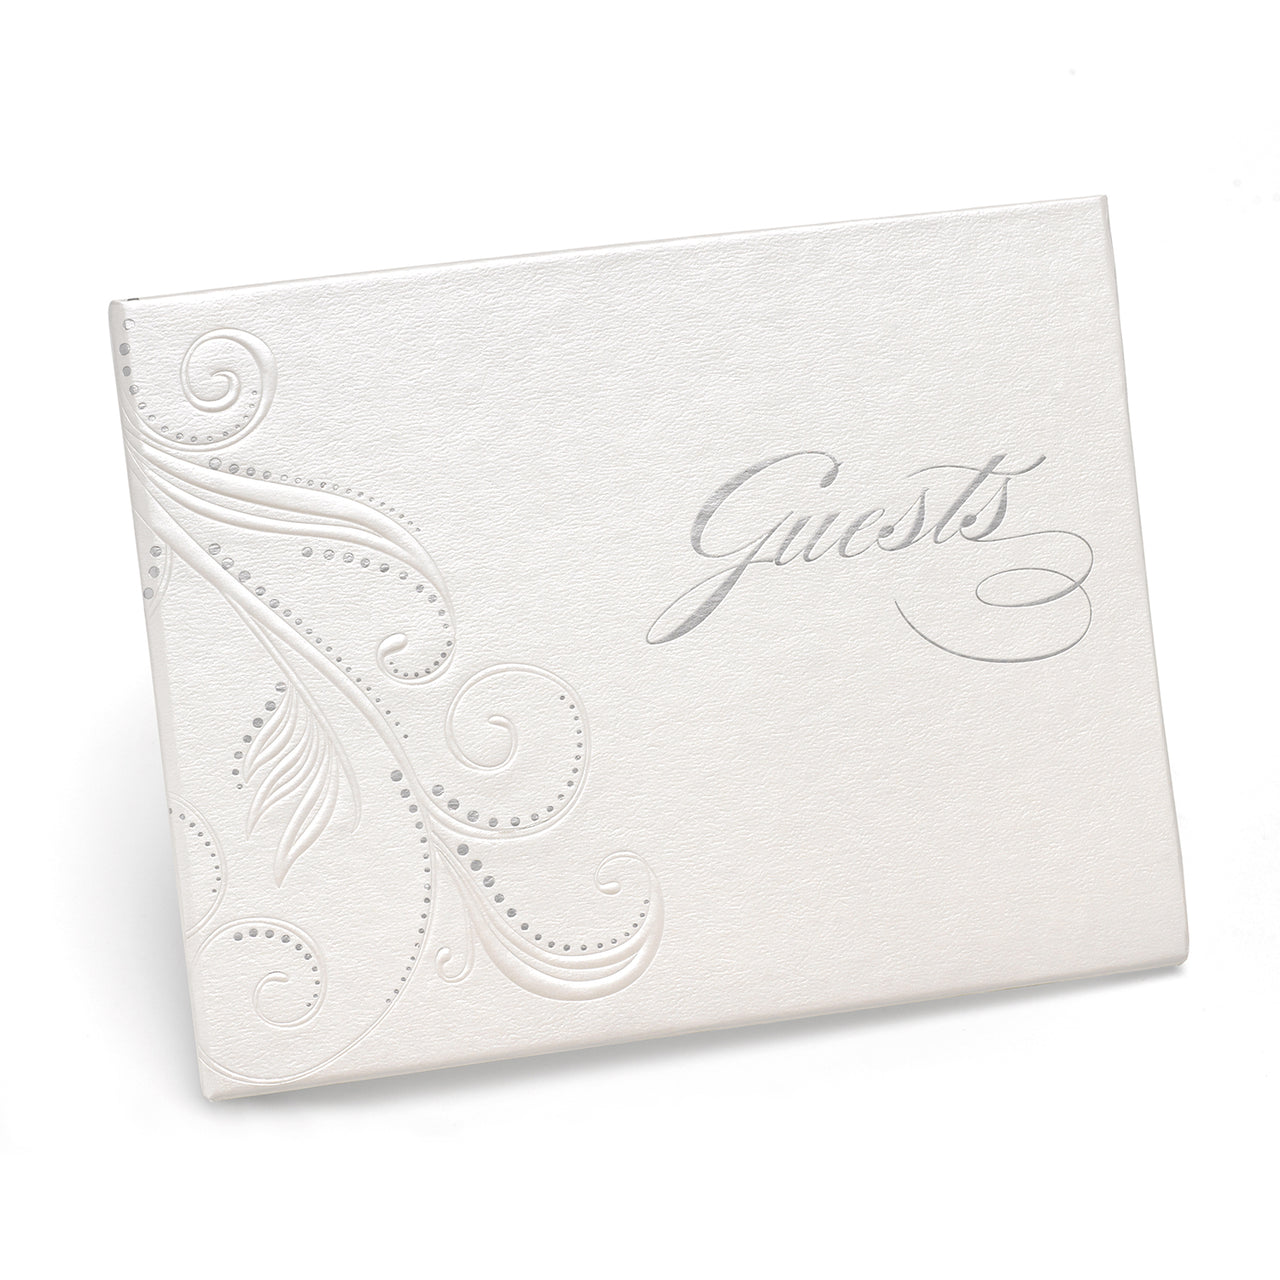 Swirl Dots Guest Book - Main Image | My Wedding Favors